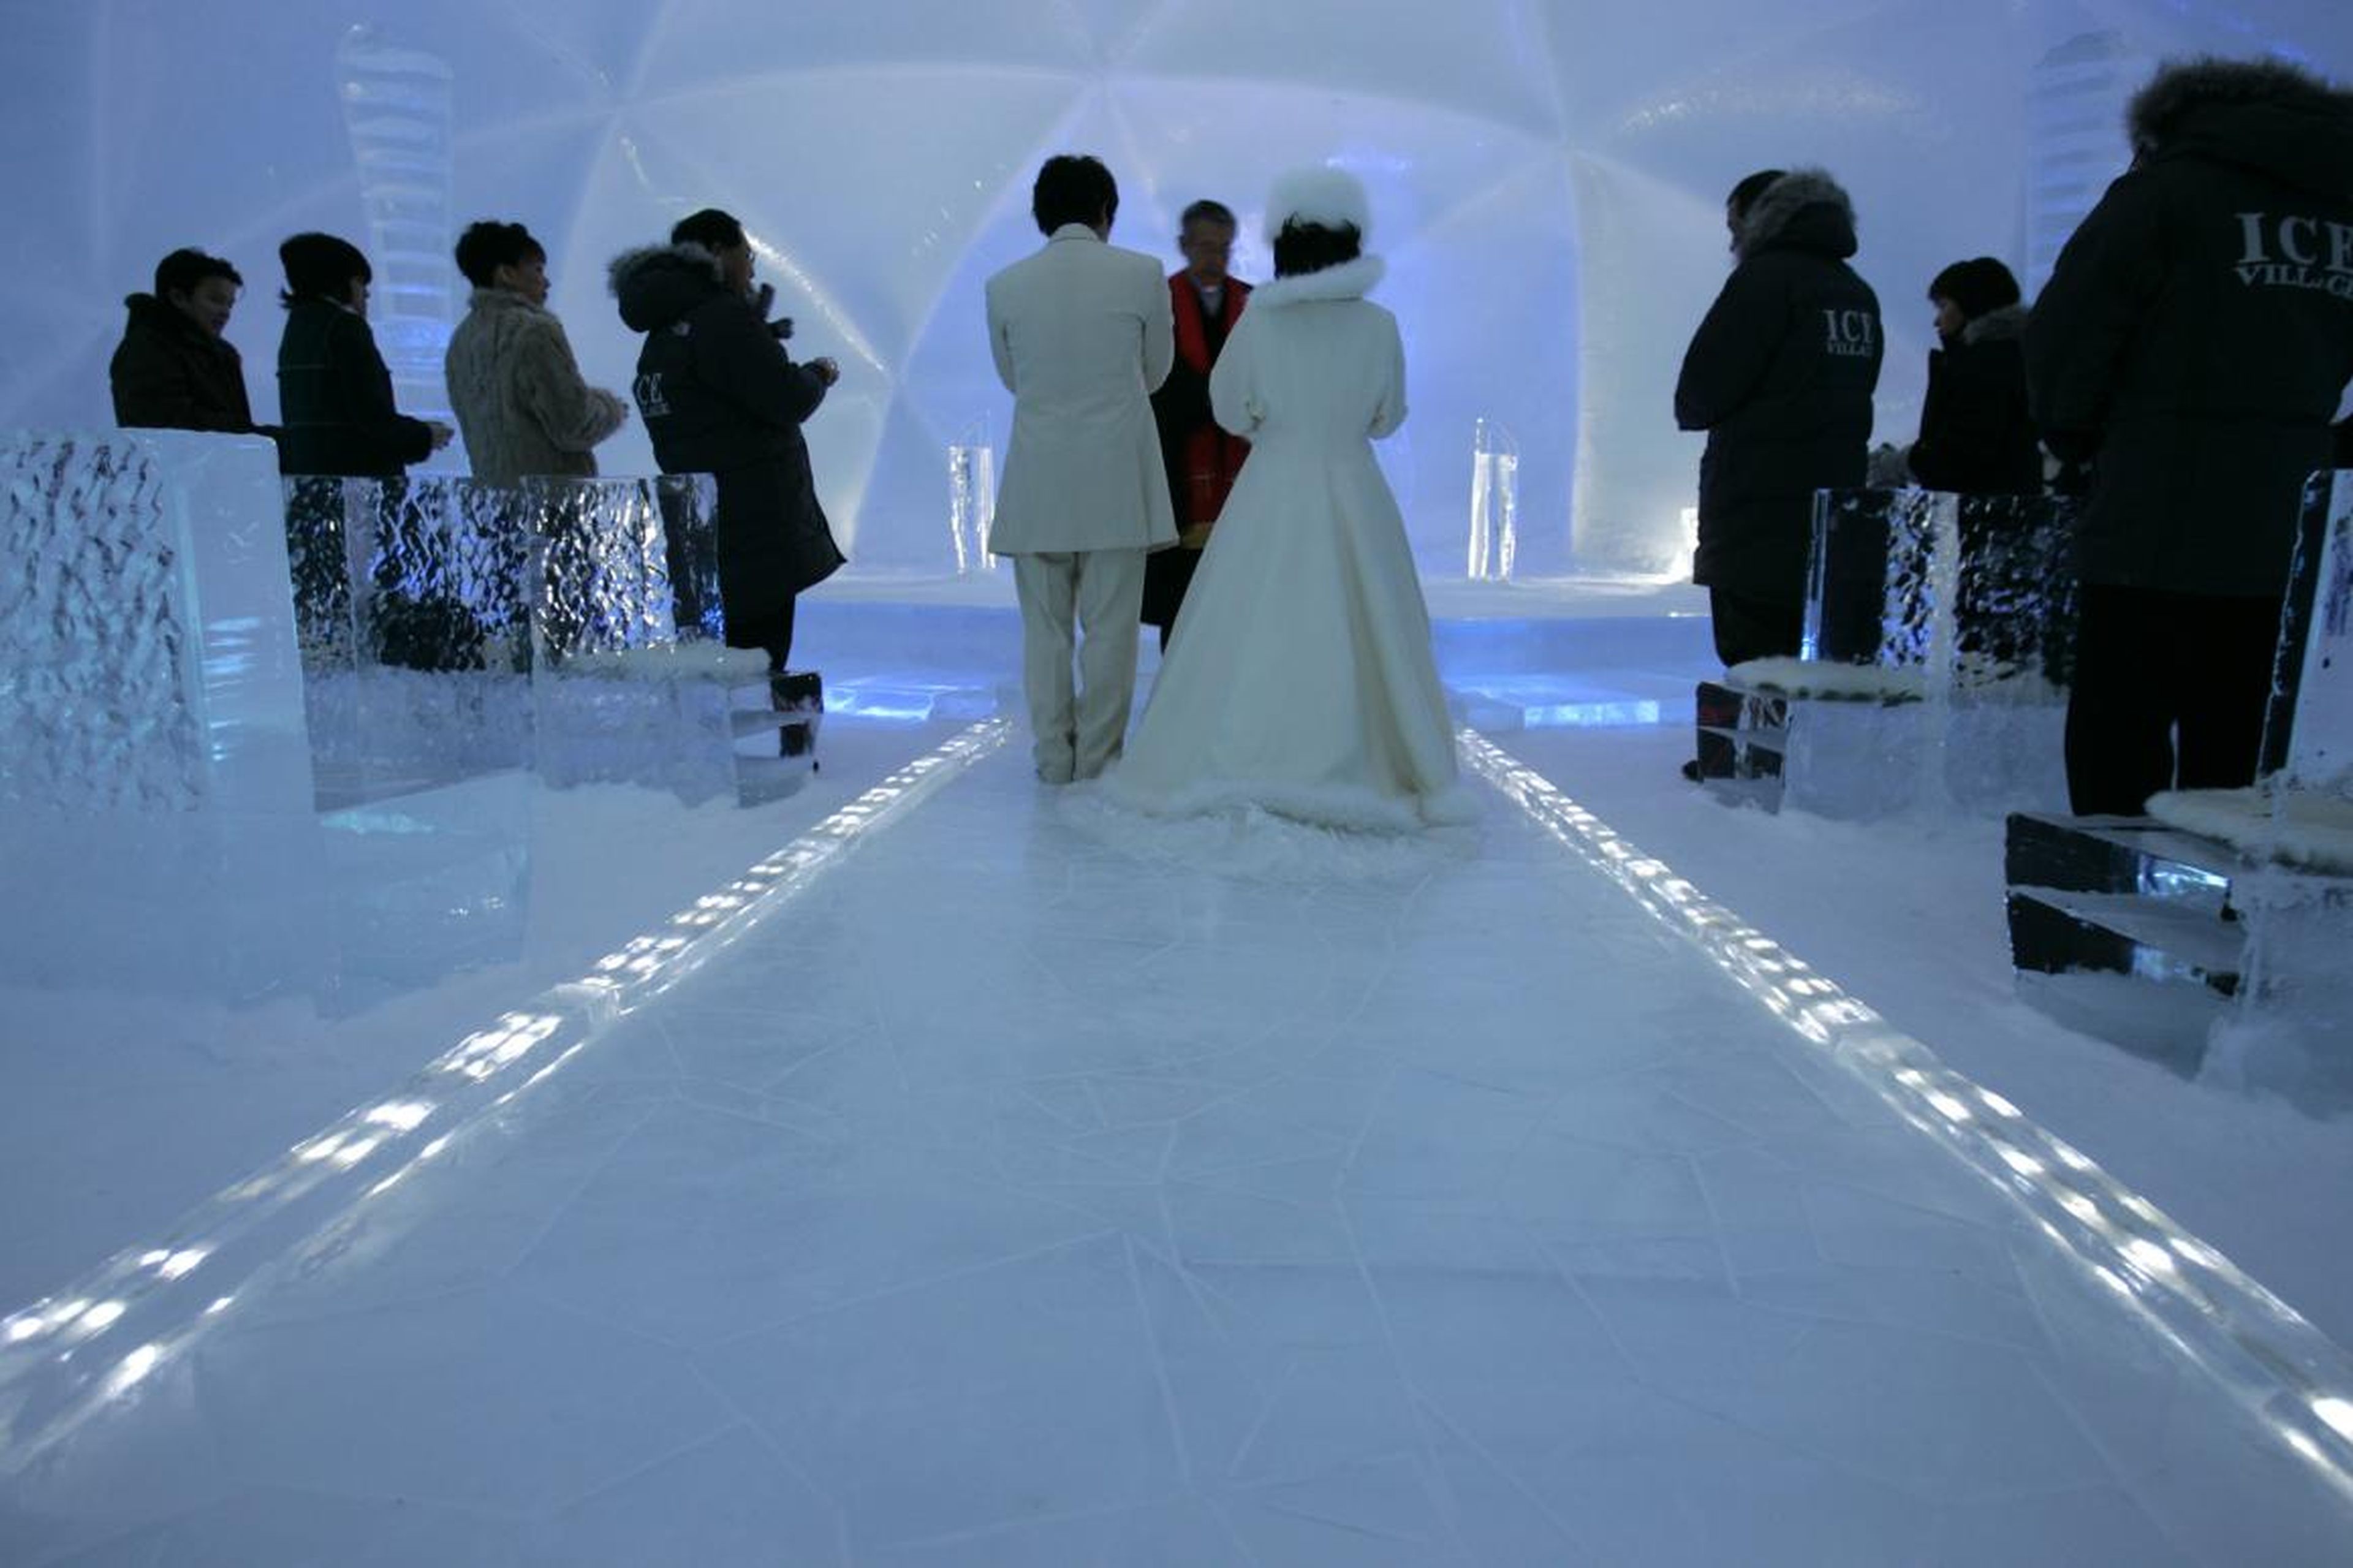 This couple wed in an ice chapel in Shimukappu, Japan, in February 2008.